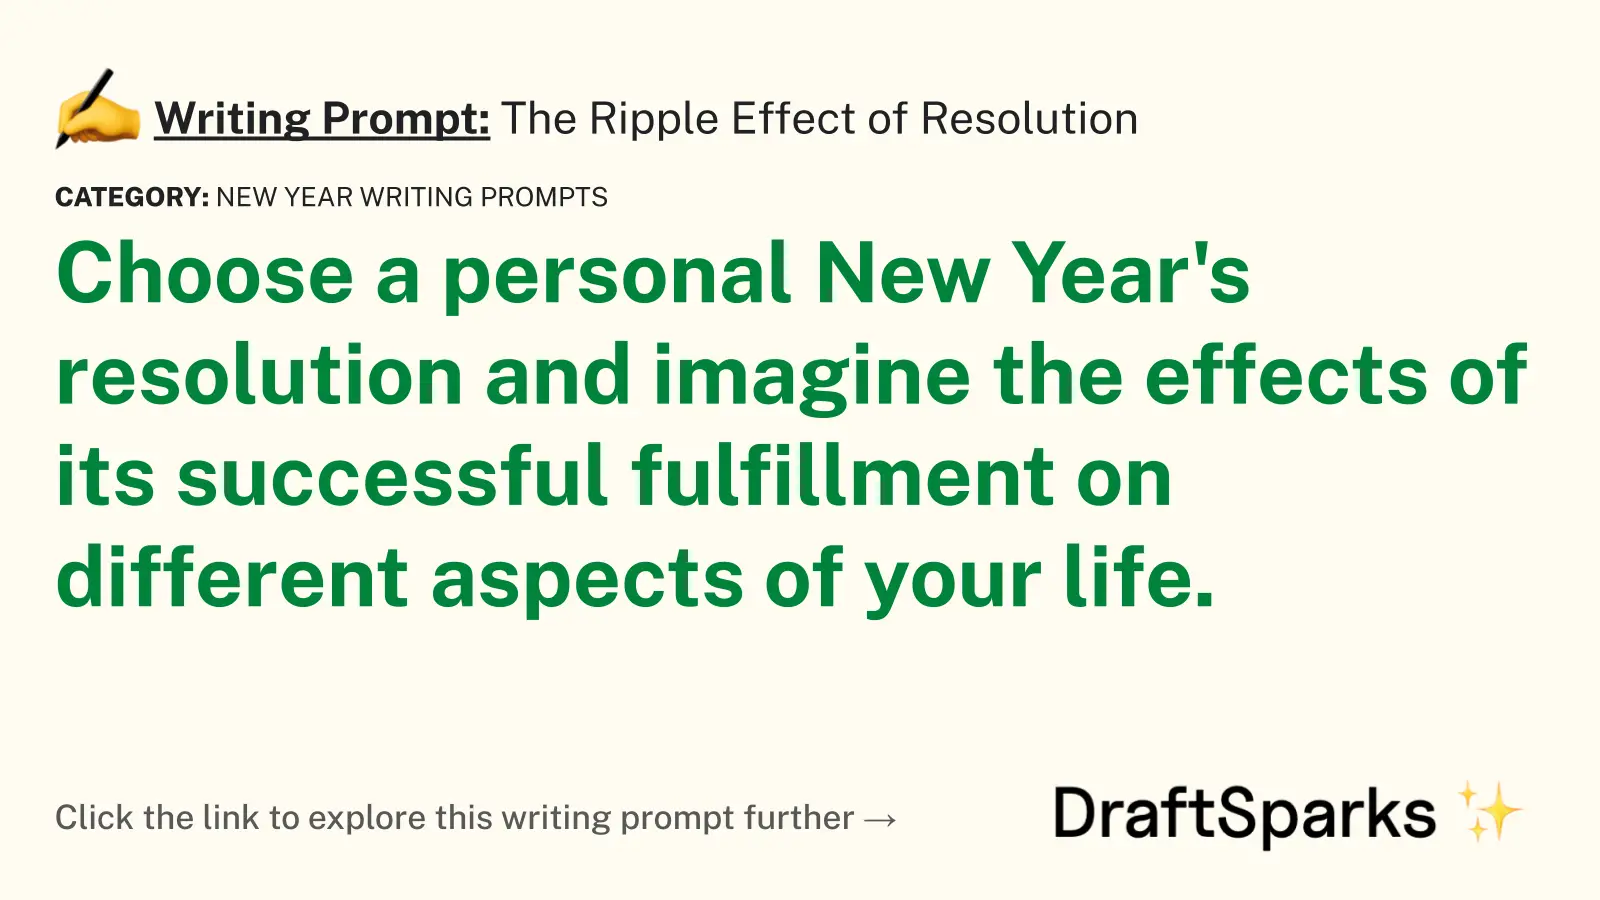 The Ripple Effect of Resolution